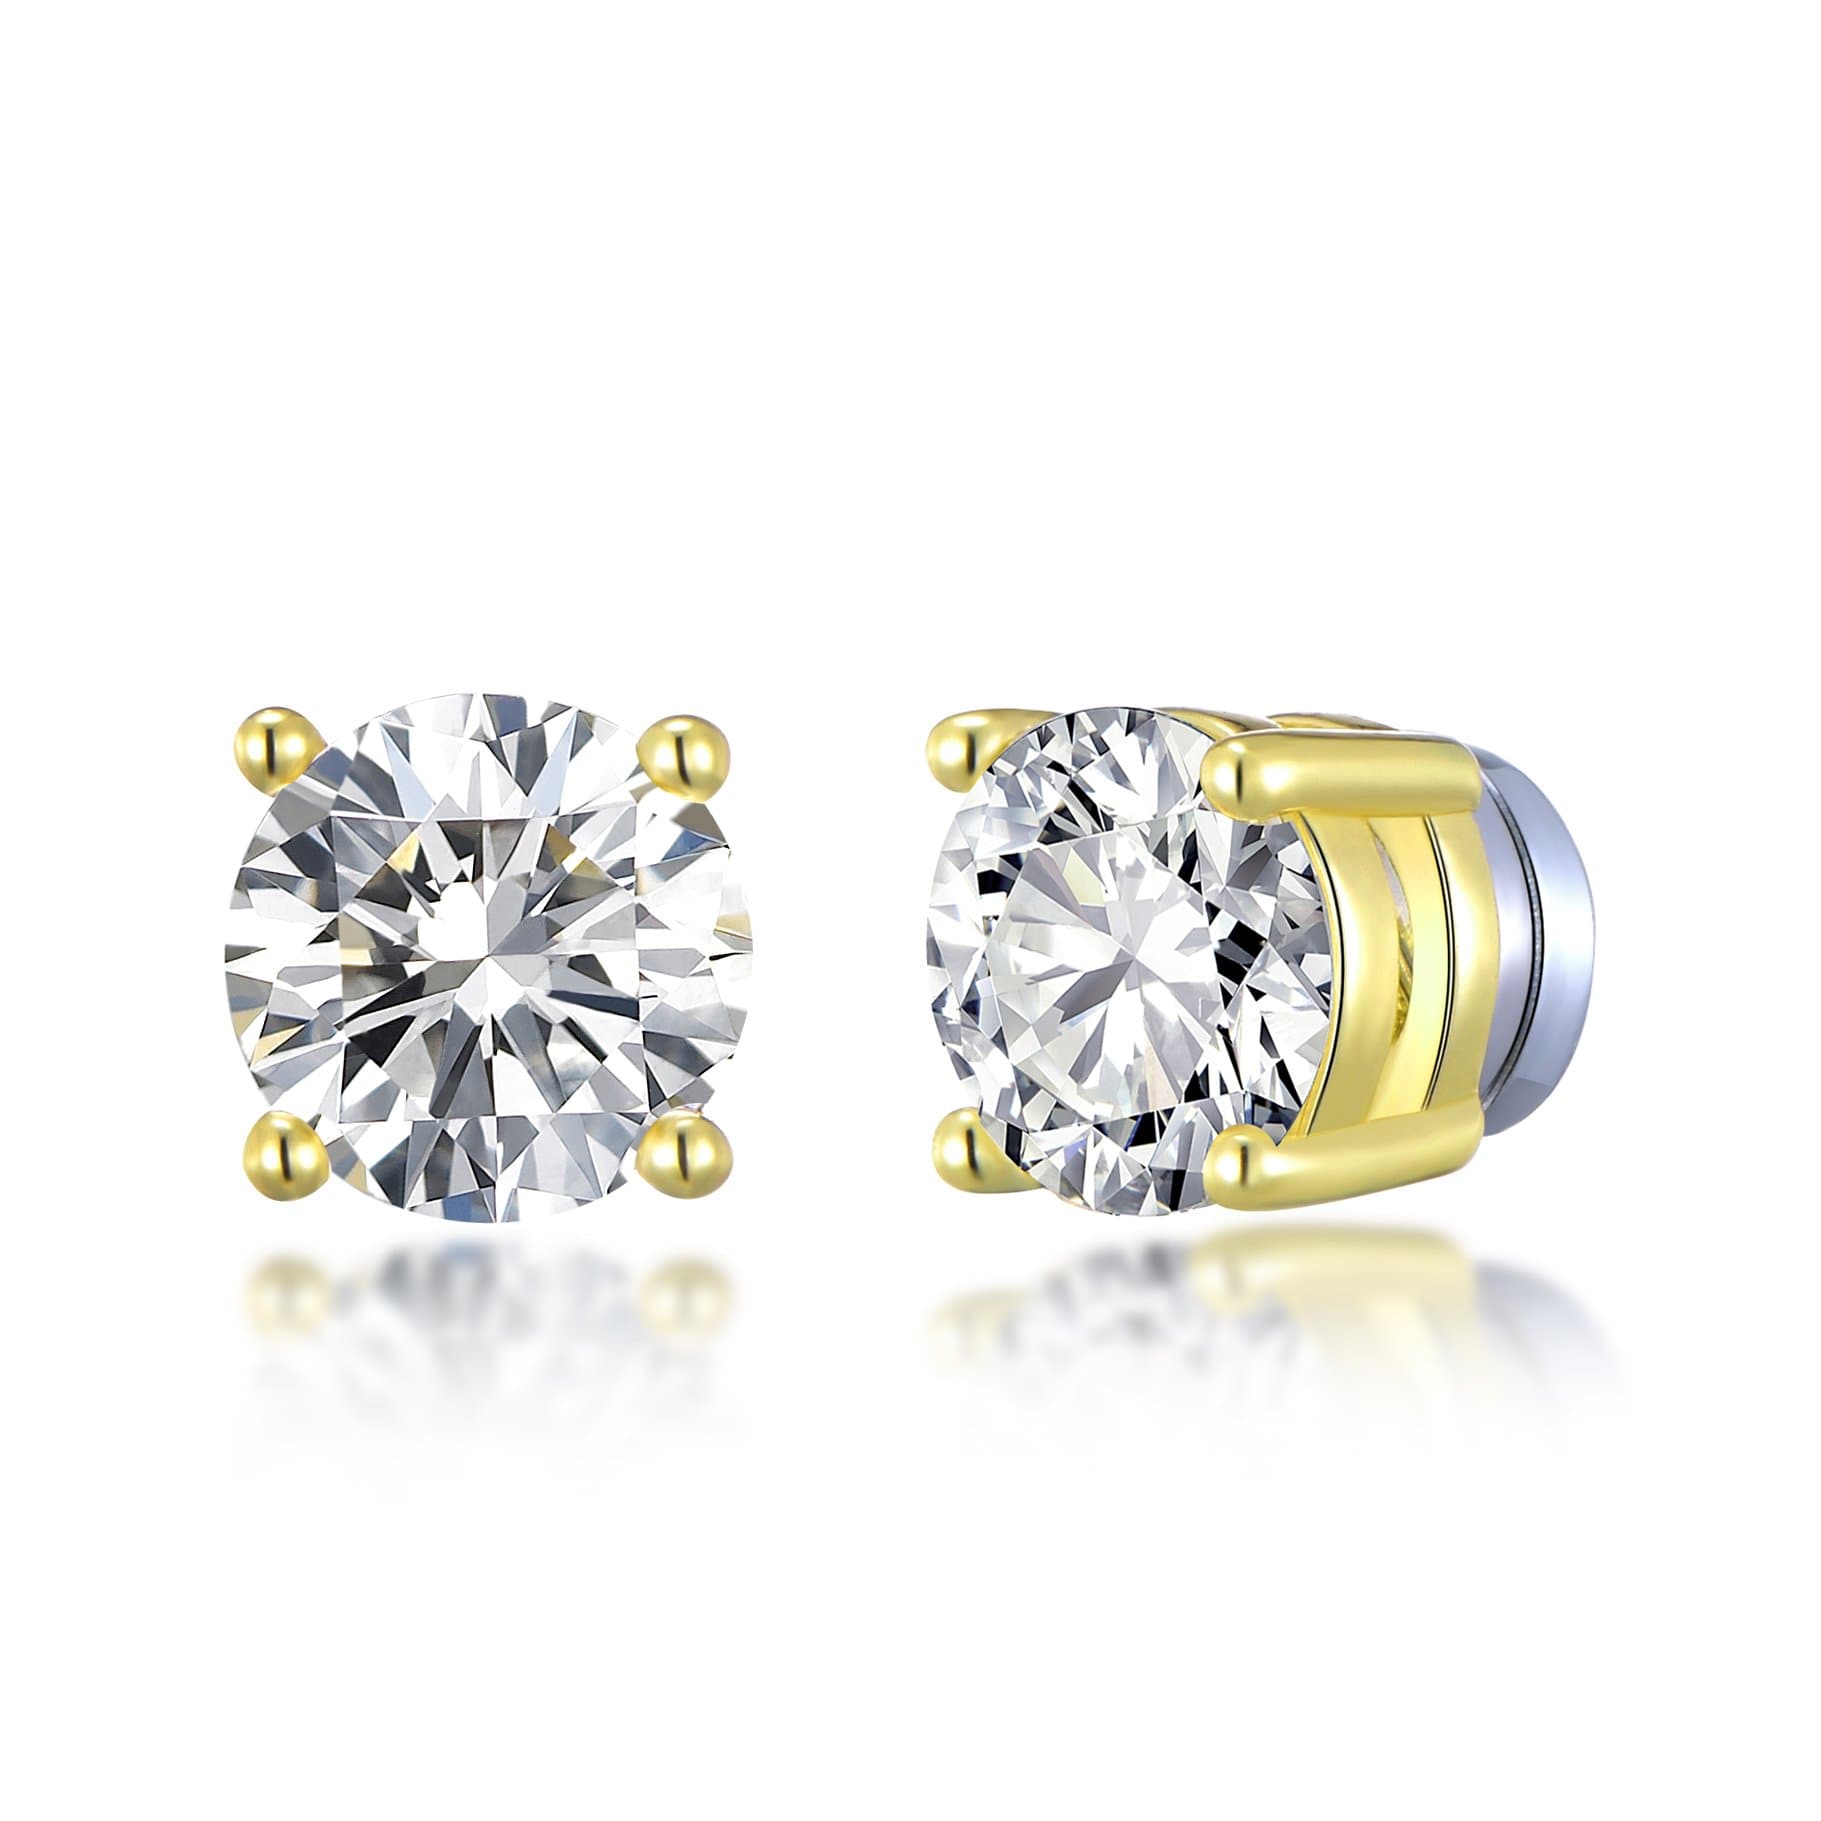 Men's Gold Plated Round Magnetic Clip On Stud Earrings Created with Zircondia® Crystals by Philip Jones Jewellery